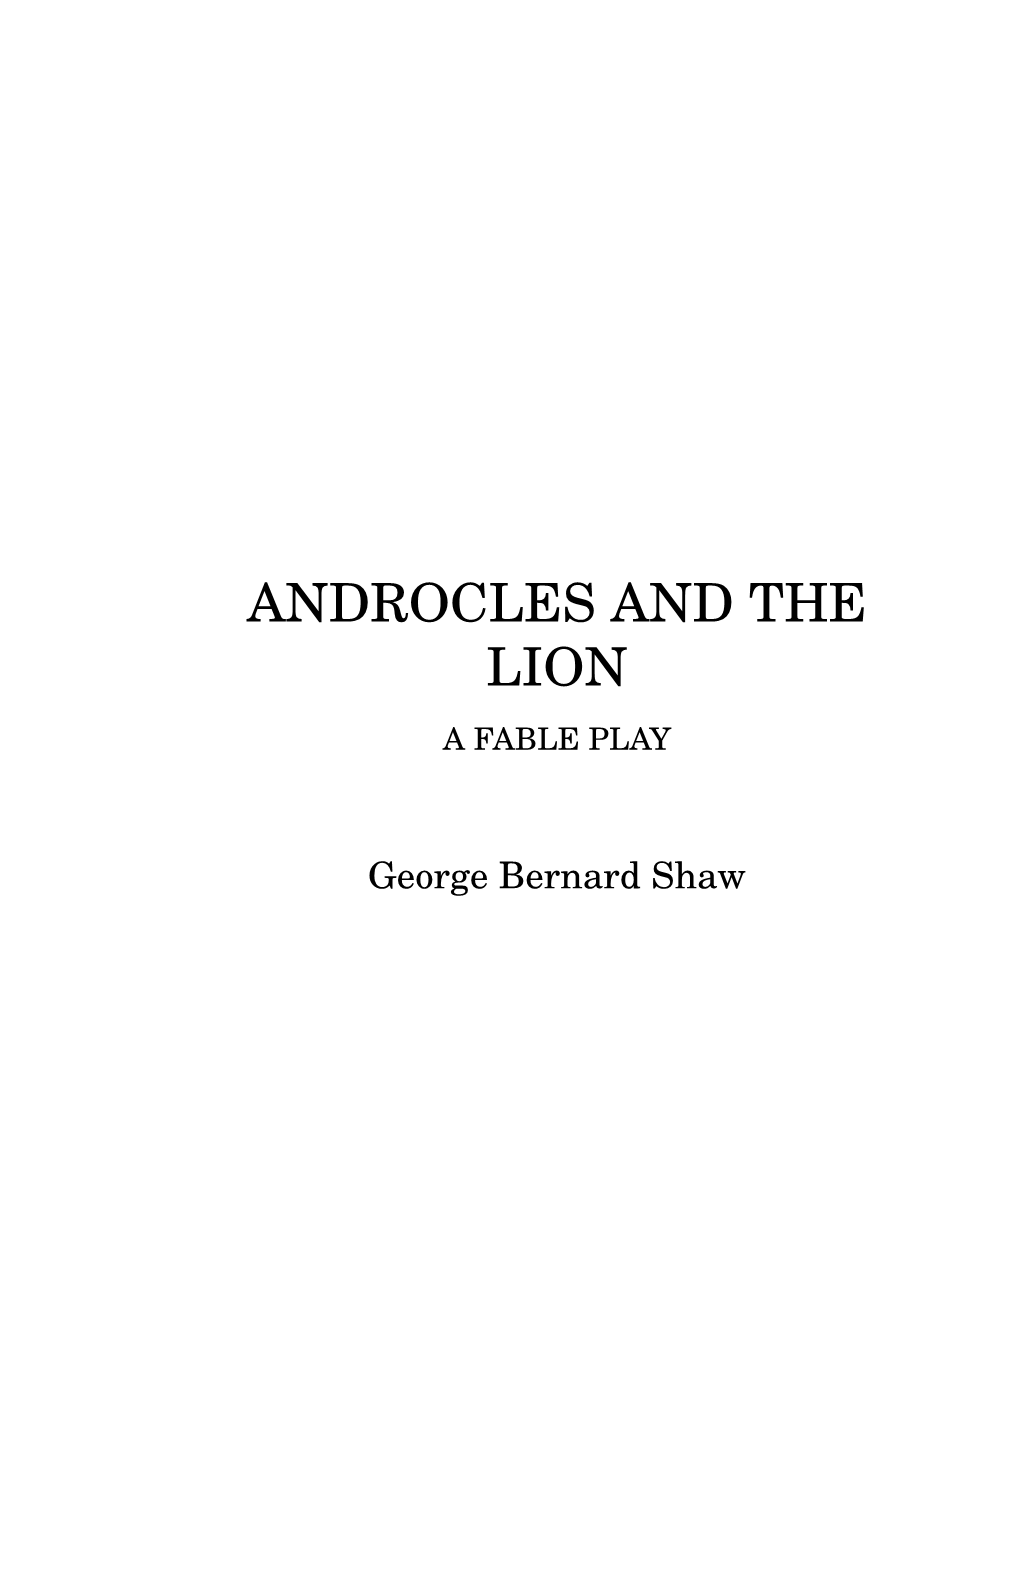 Androcles and the Lion a Fable Play